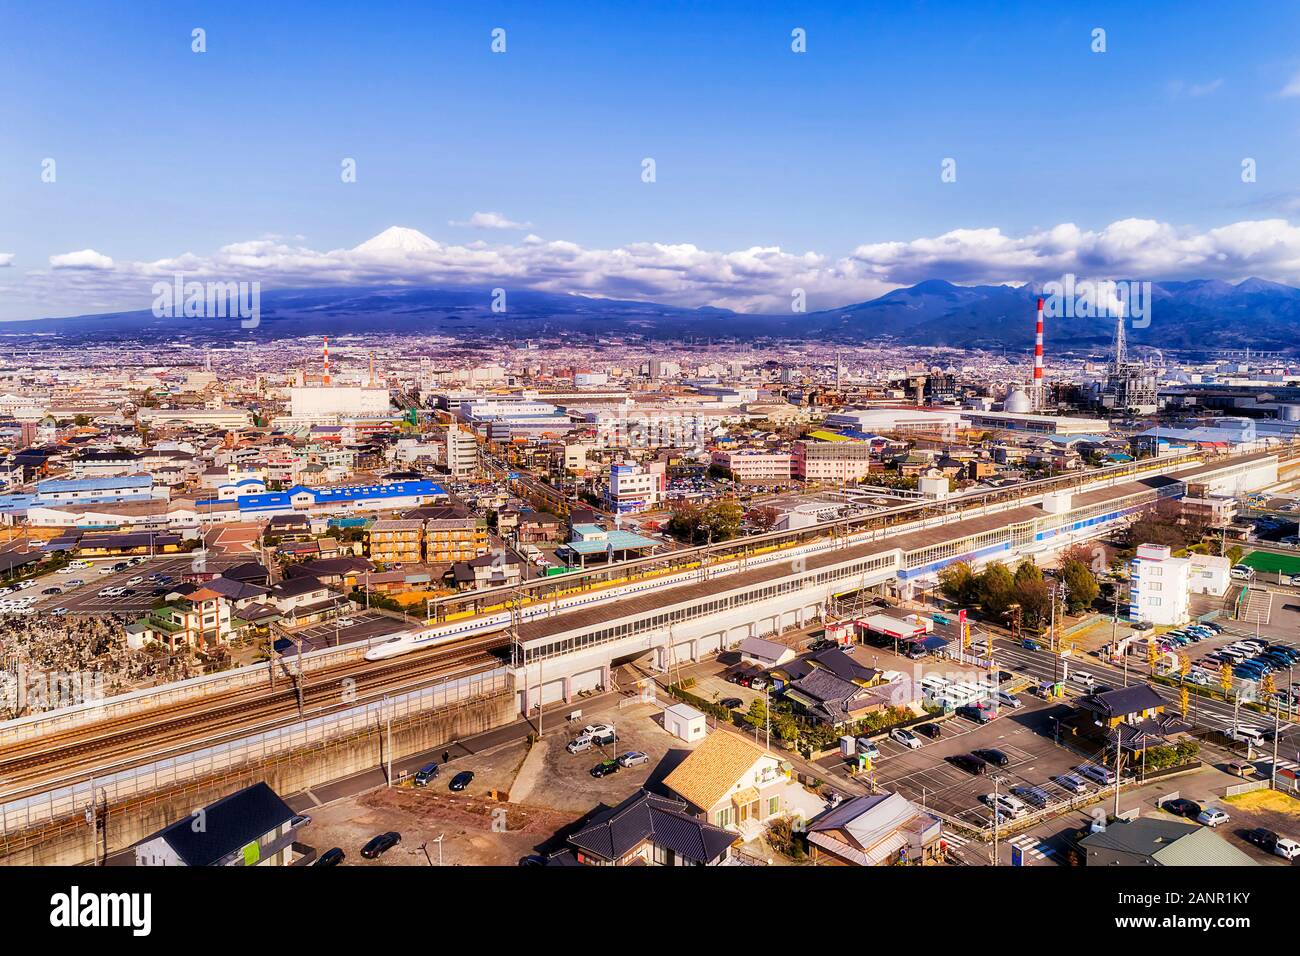 Shin-Fuji train station for  express bullet trains in view of majestic Mt Fuji in Japan on a sunny day. Stock Photo